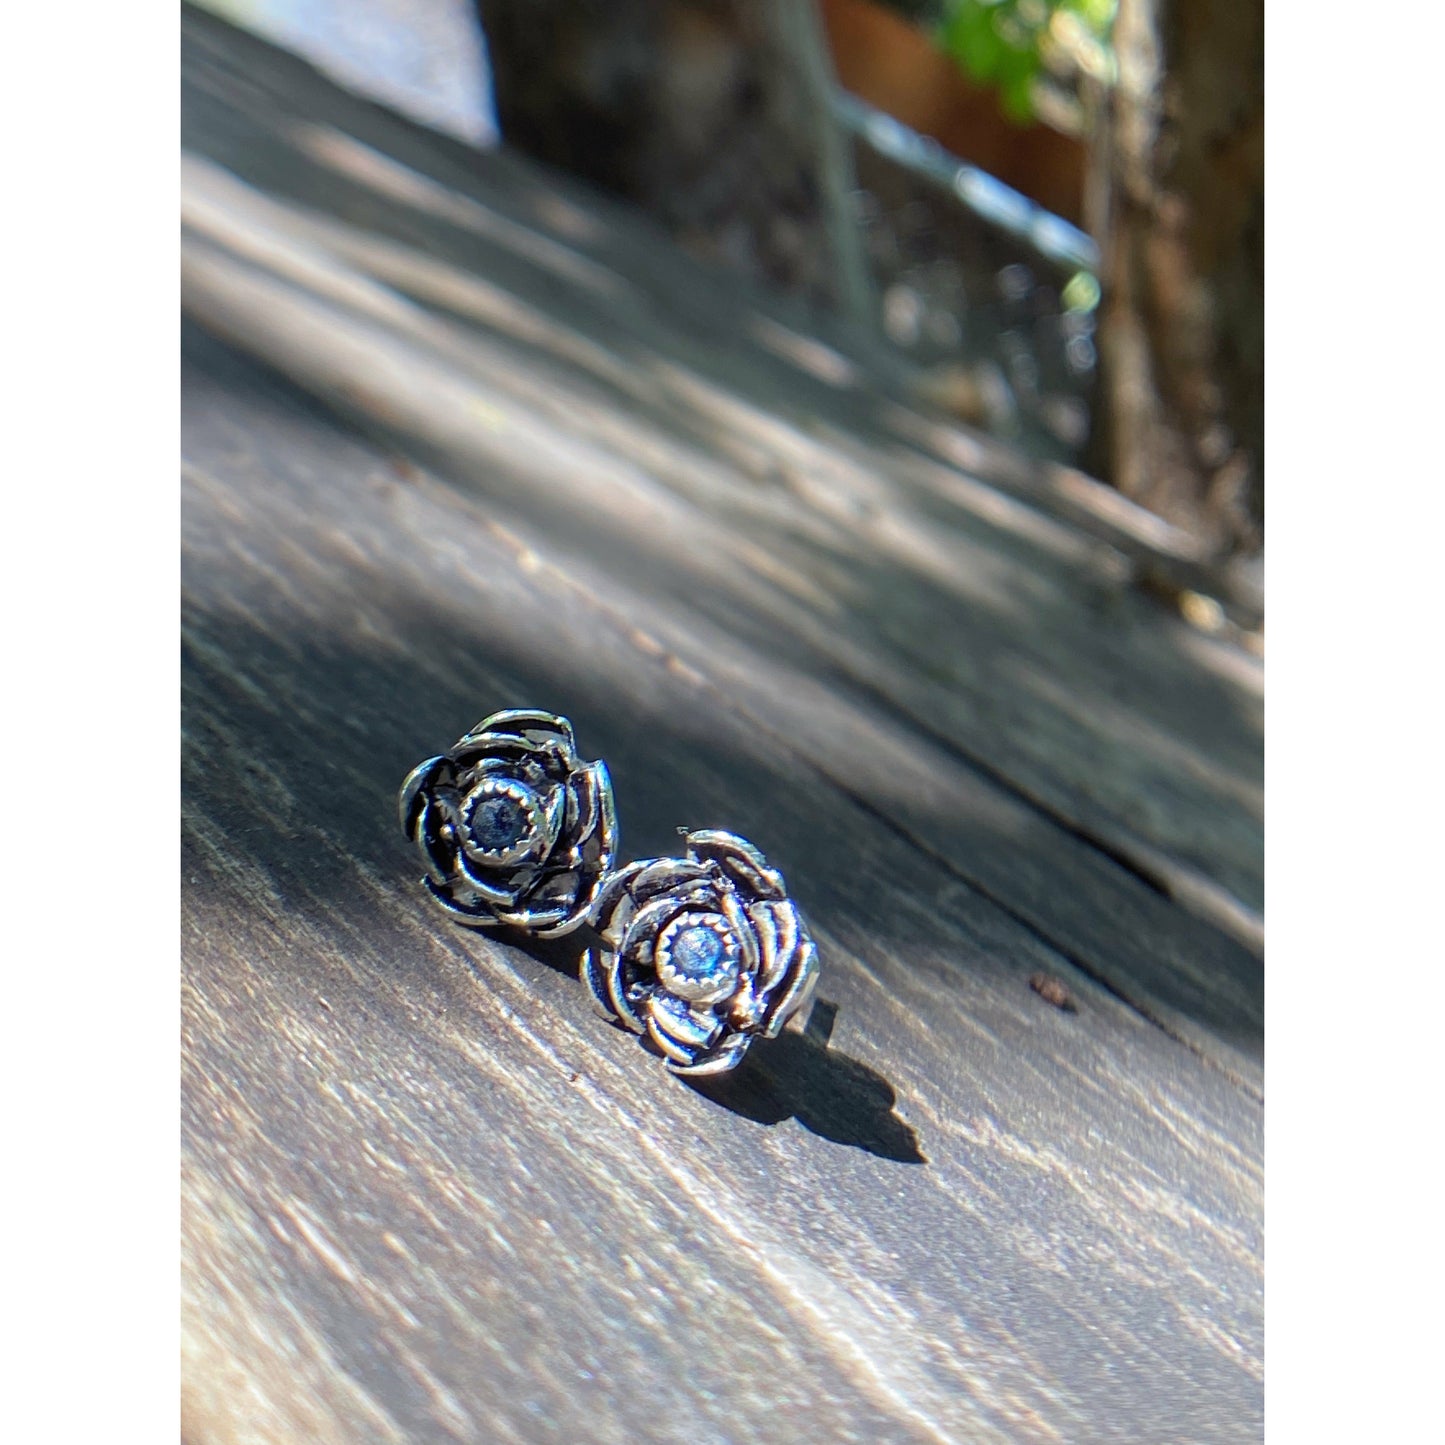 Rose wrapped silver around a small sapphire looking like the center of the bloom.